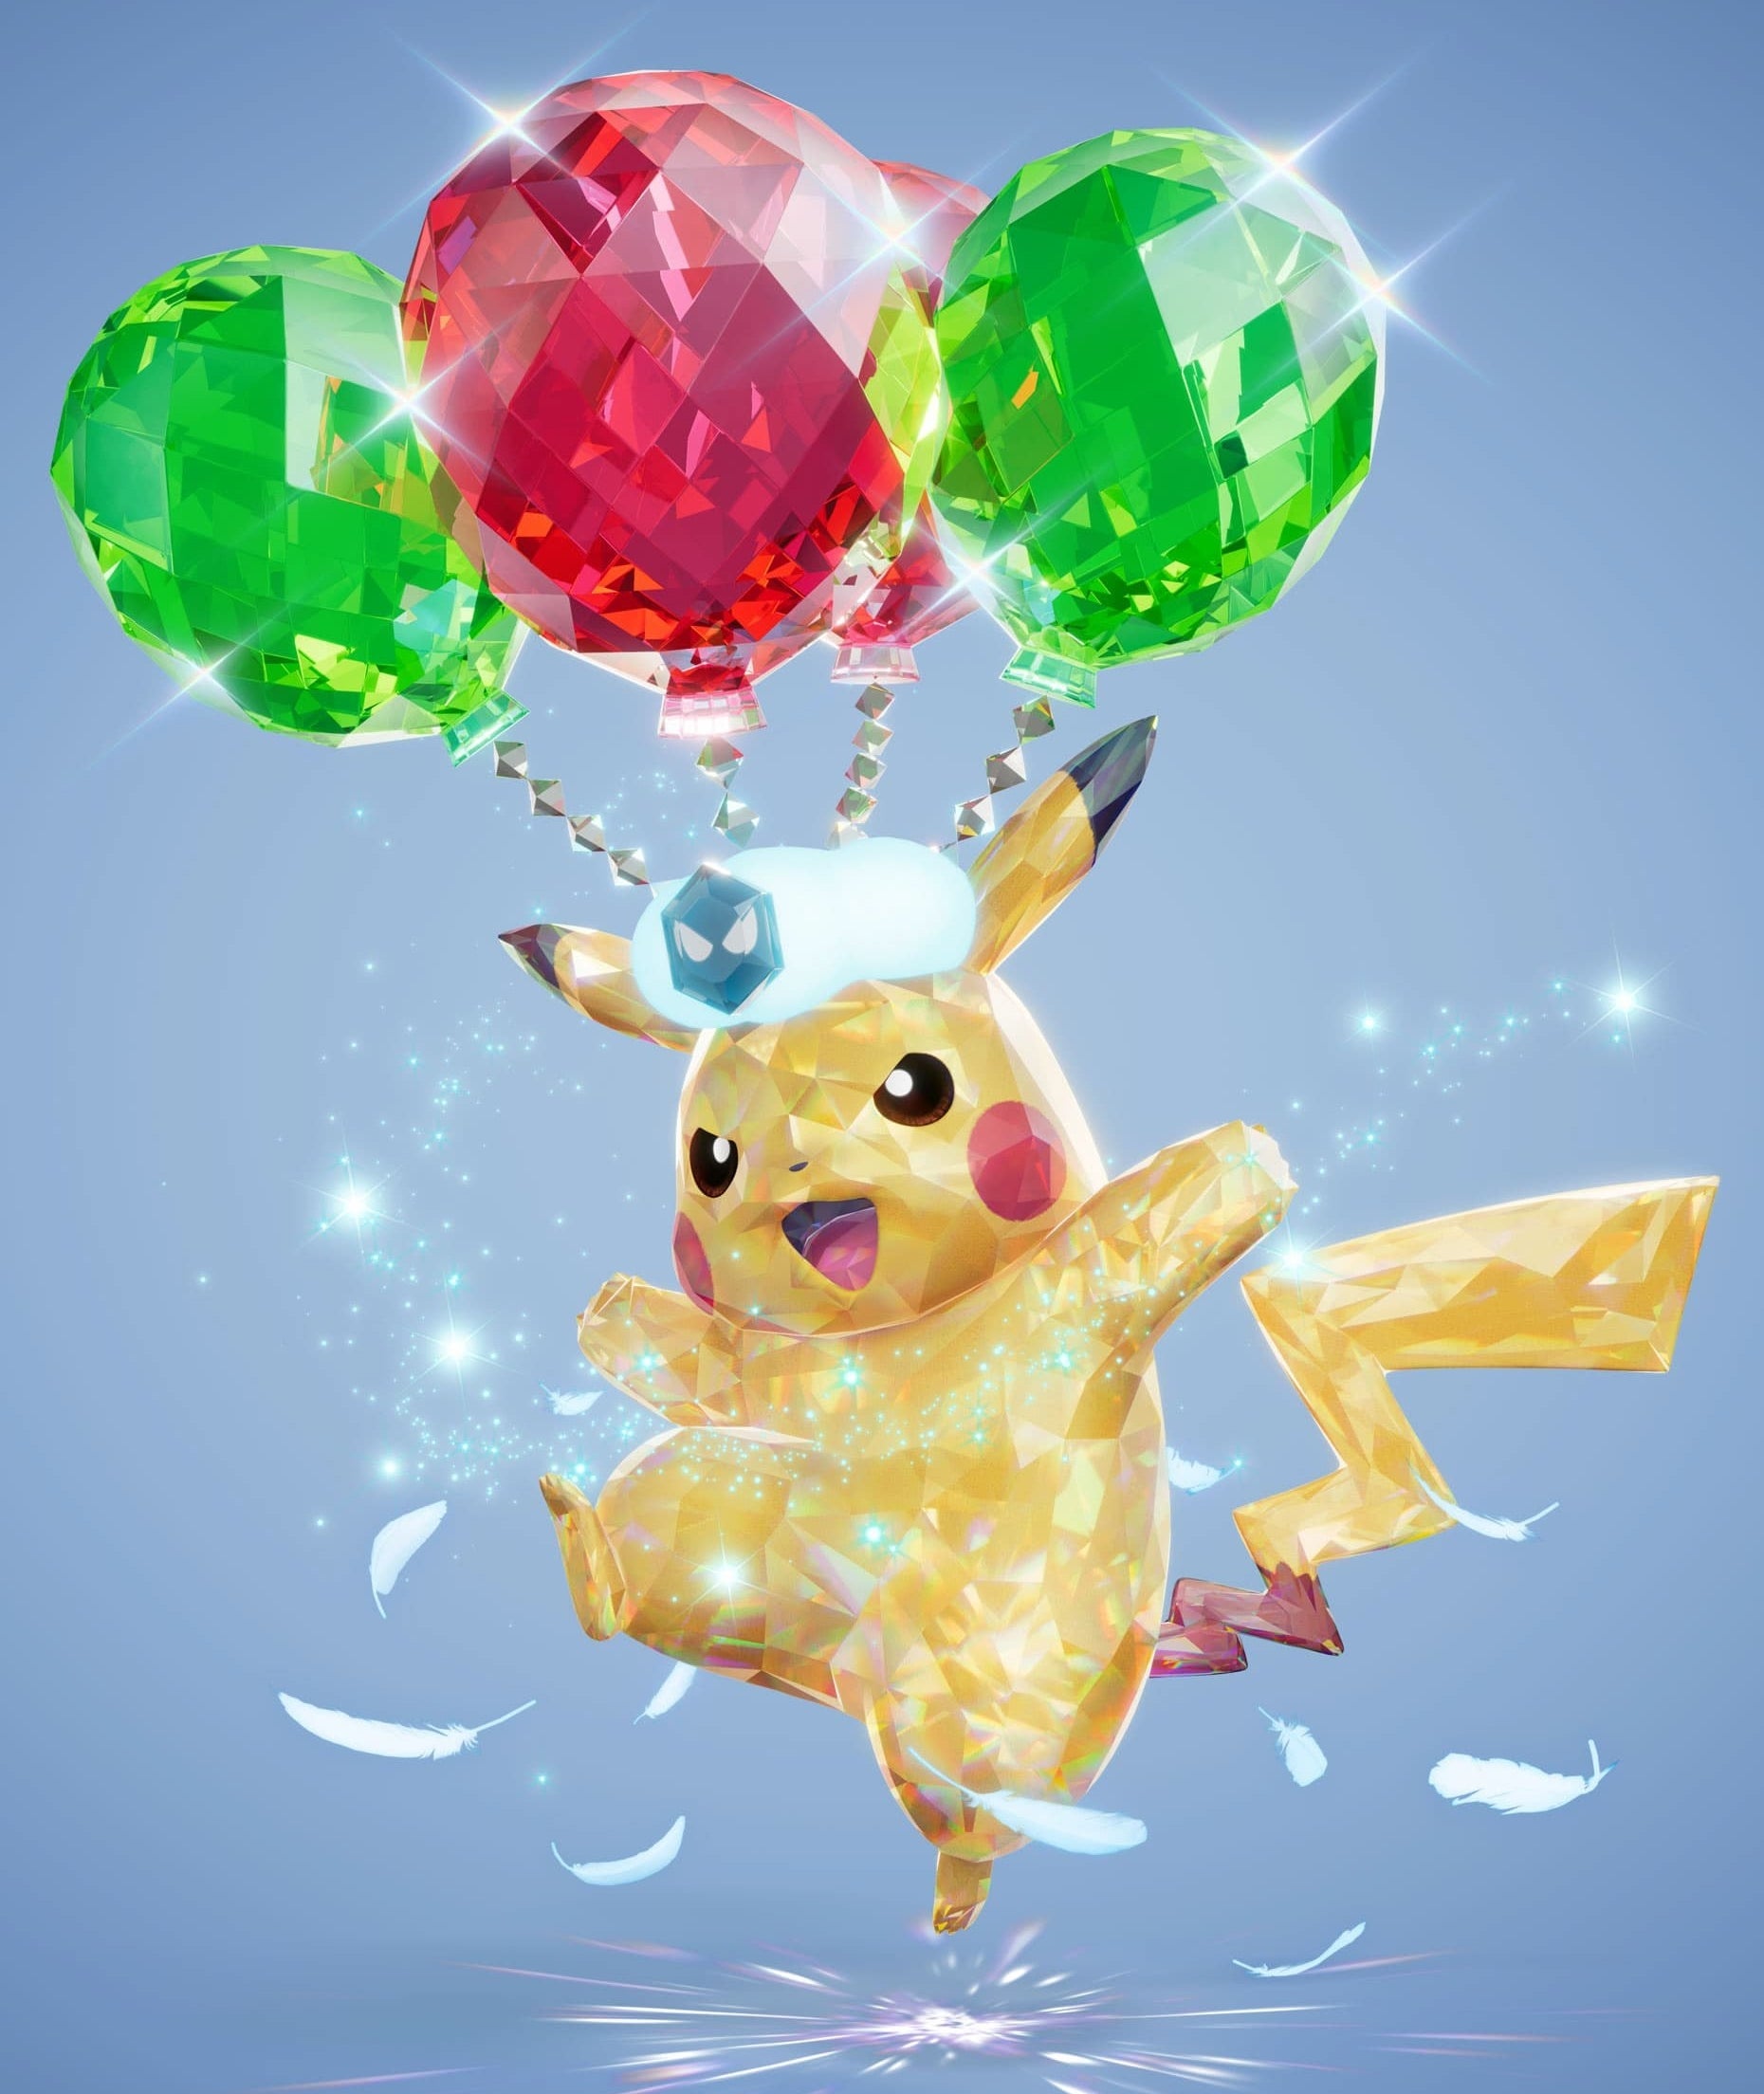 Pokemon Scarlet and Violet Early-Purchase Bonus Gets Players a